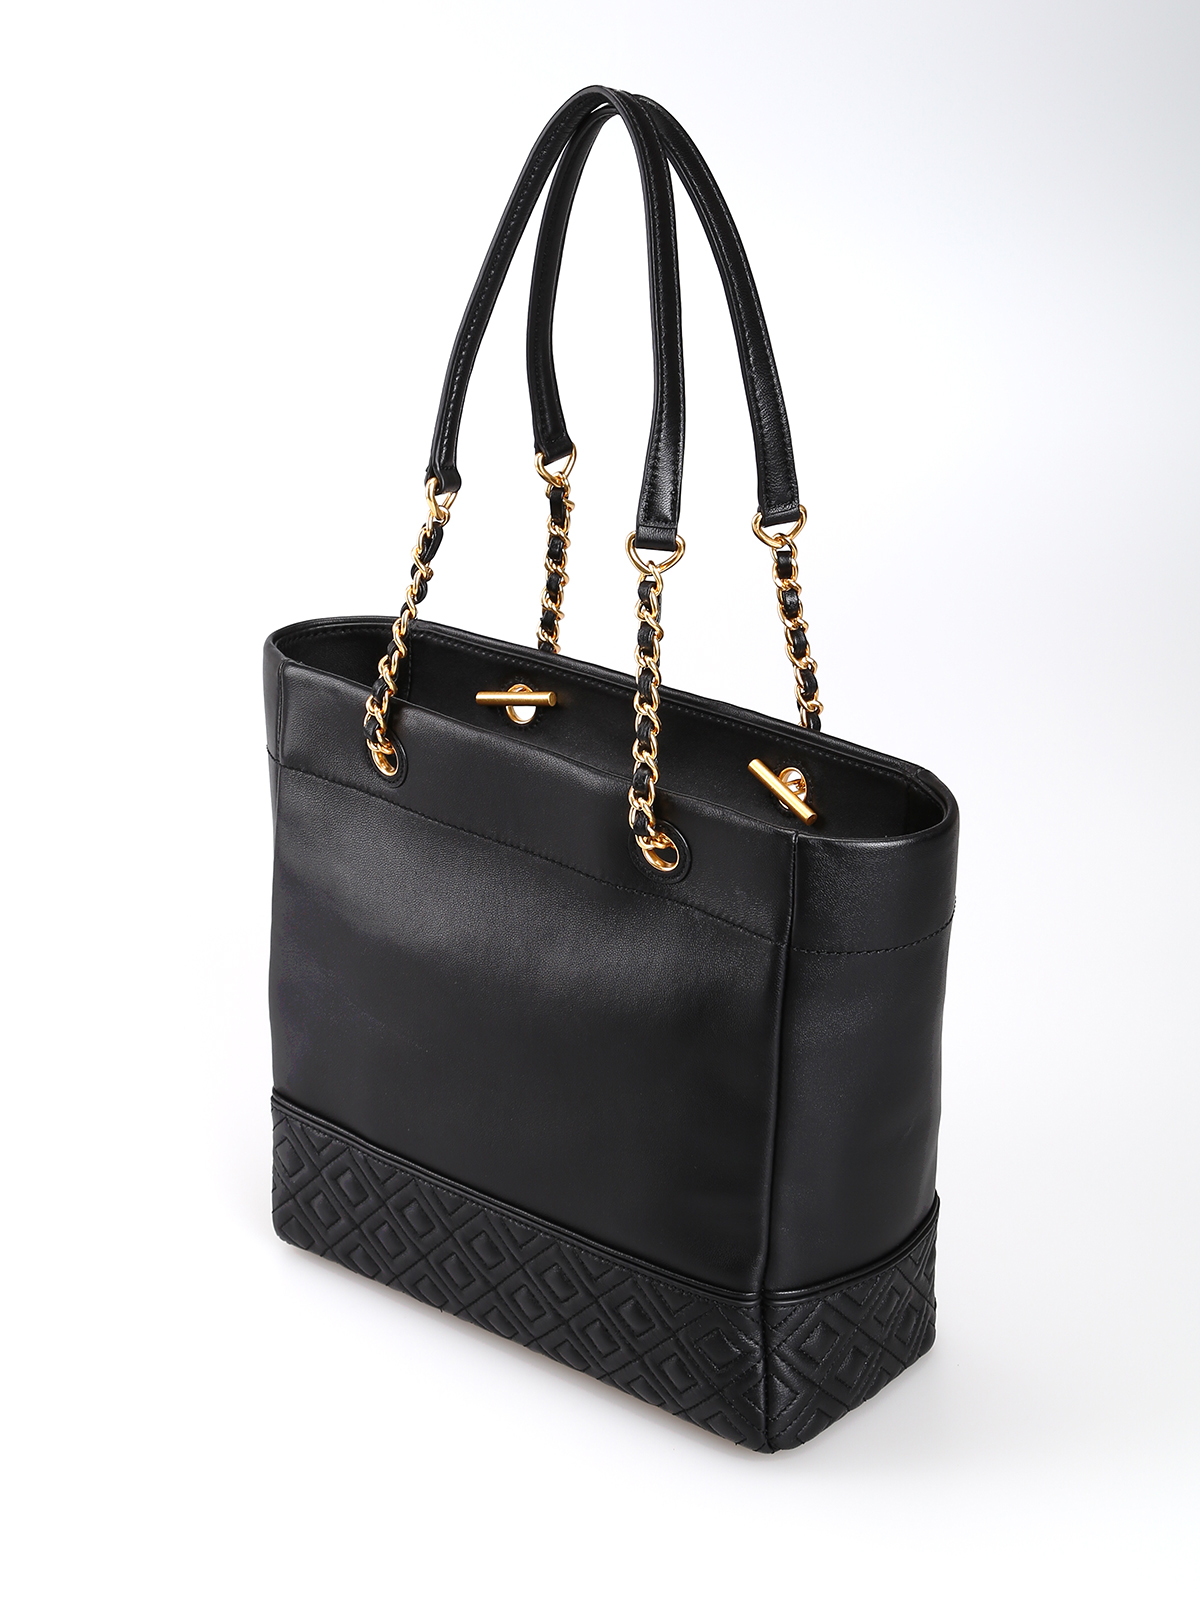 Tory Burch black leather tote